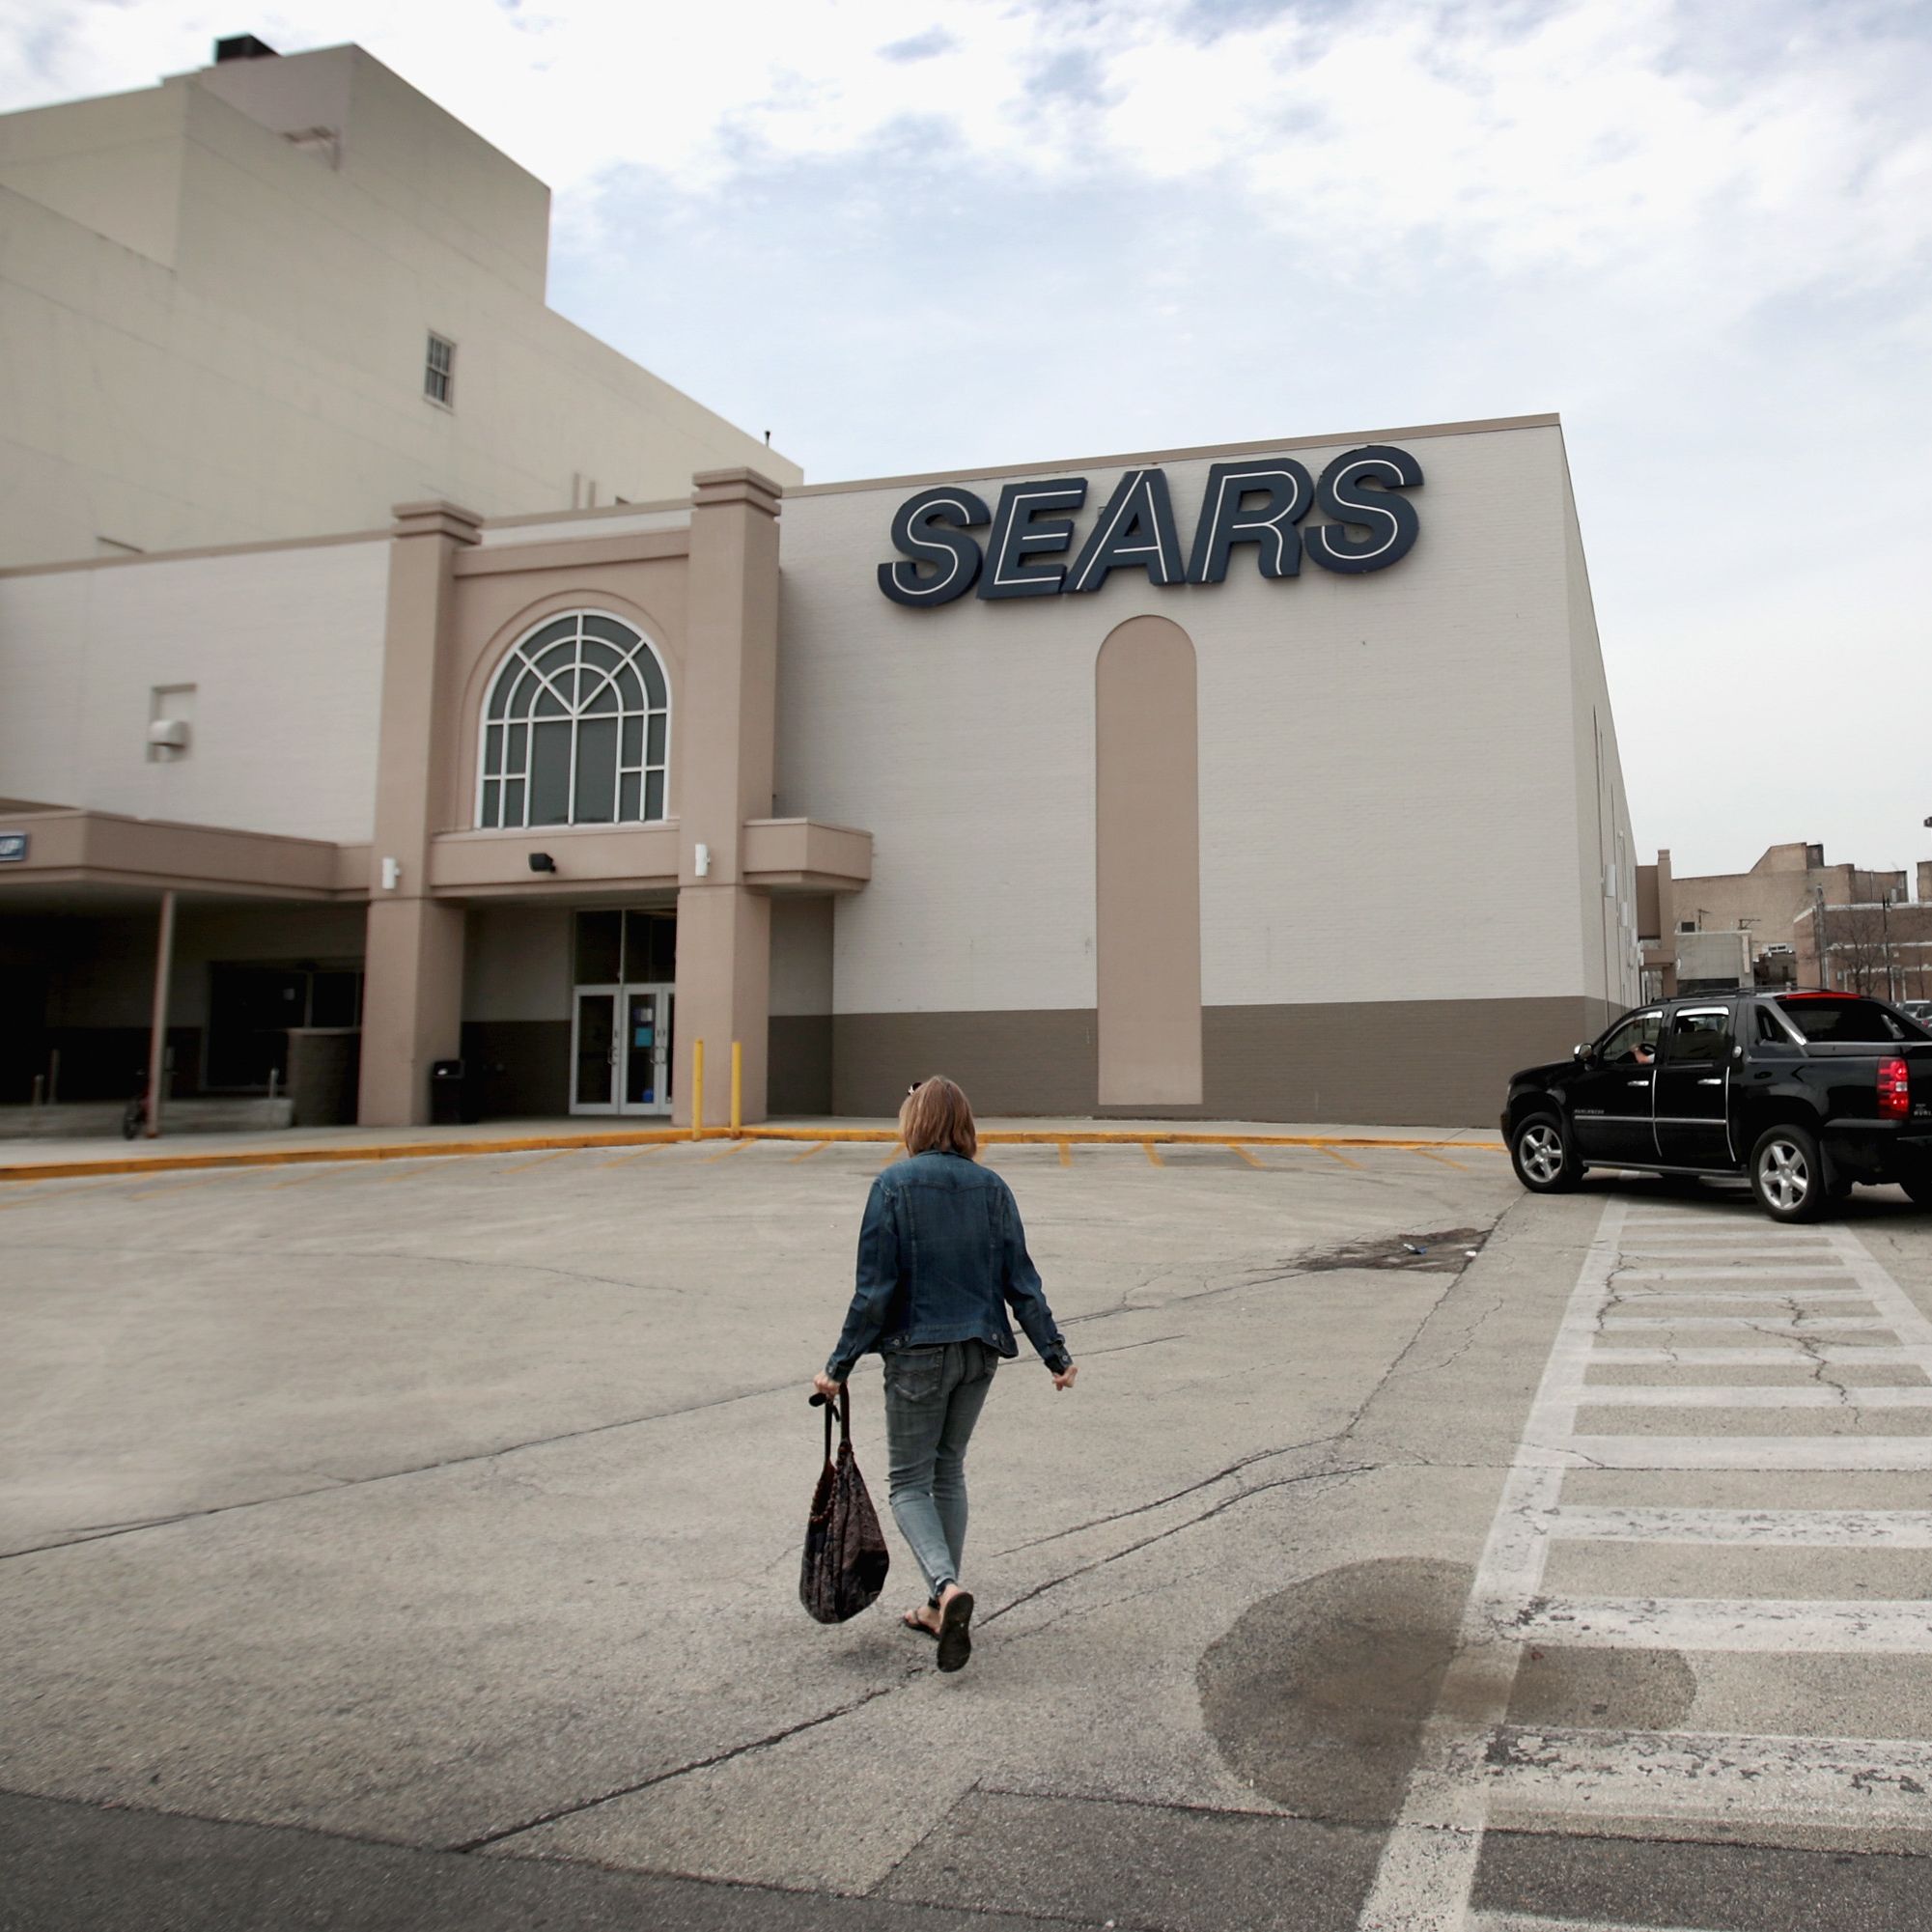 Sears' survival is in doubt | CNN Business